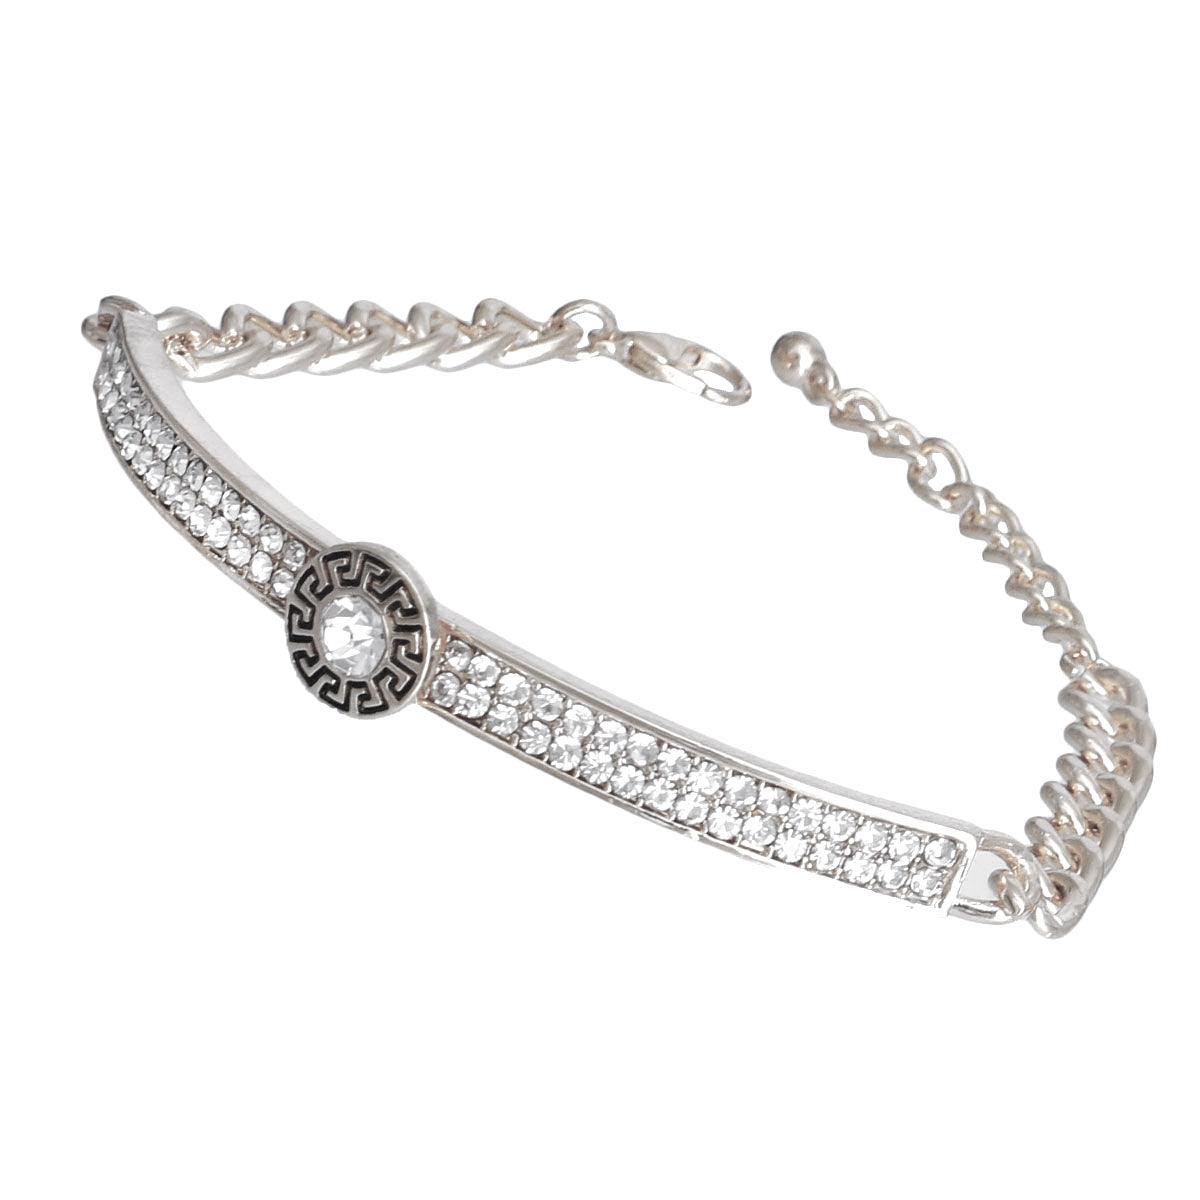 Upgrade Your Style: Silver Half Chain Bangle Bracelet - Shop Now!